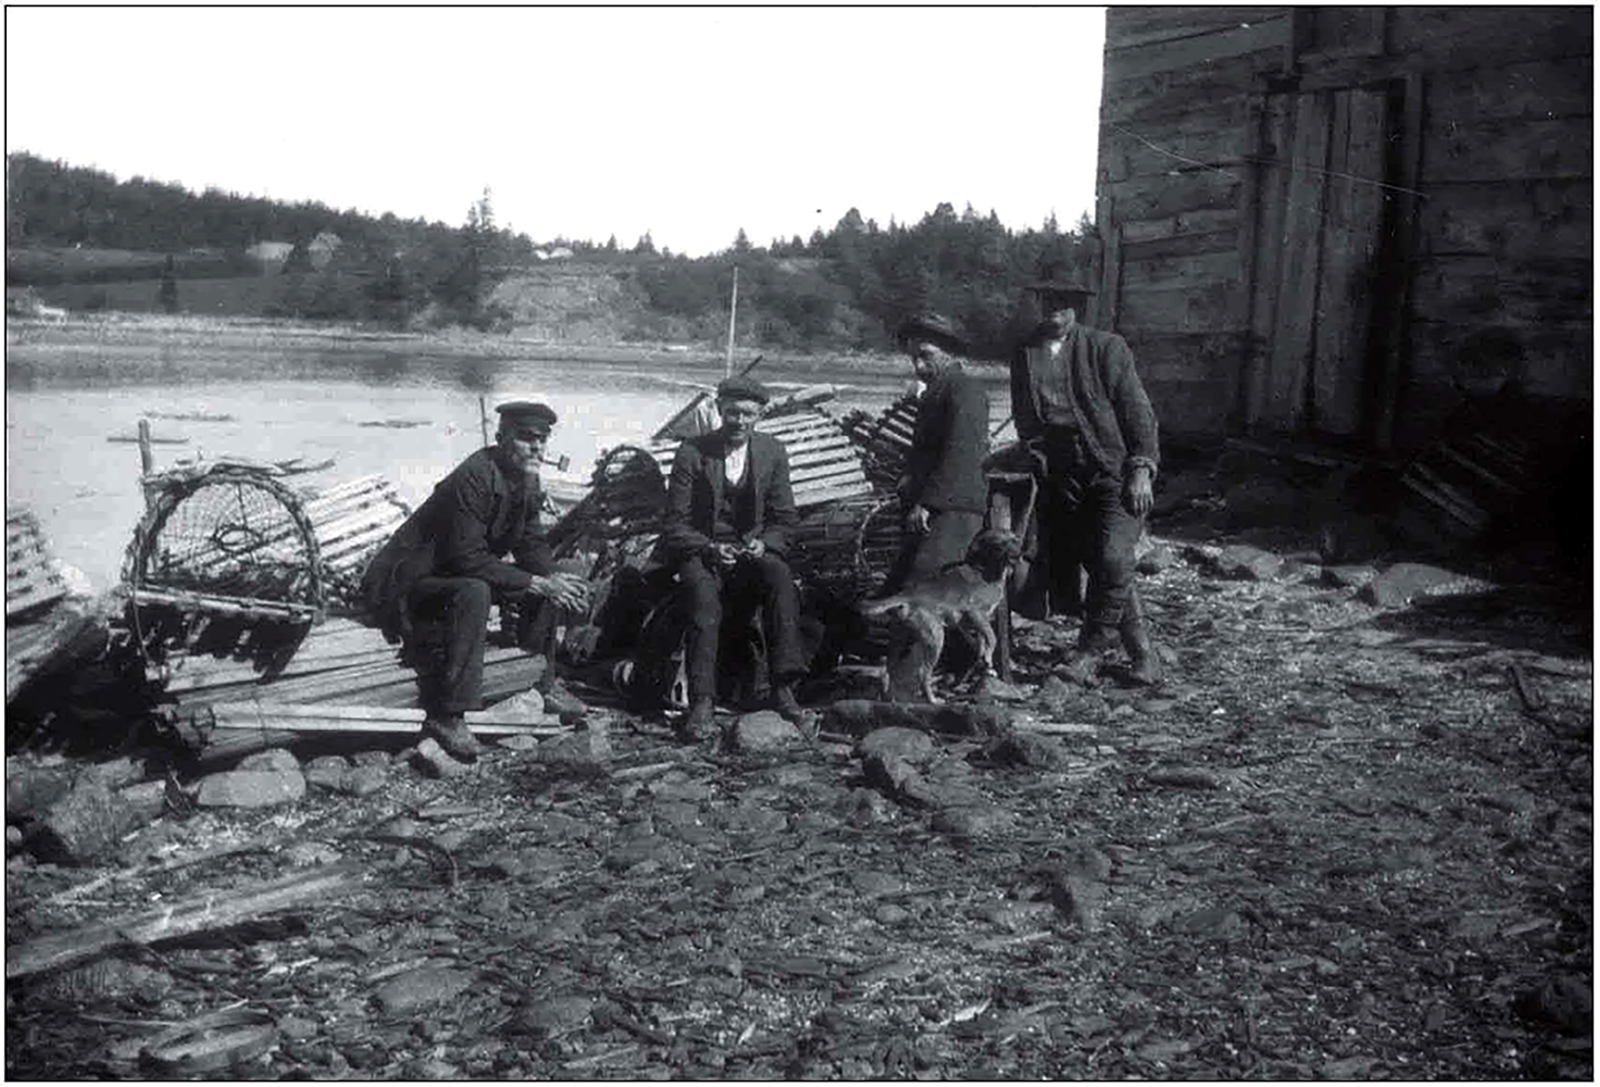 An old black and white photo of four men and a dog sitting or leaning against fishing gear in front of a waterway.